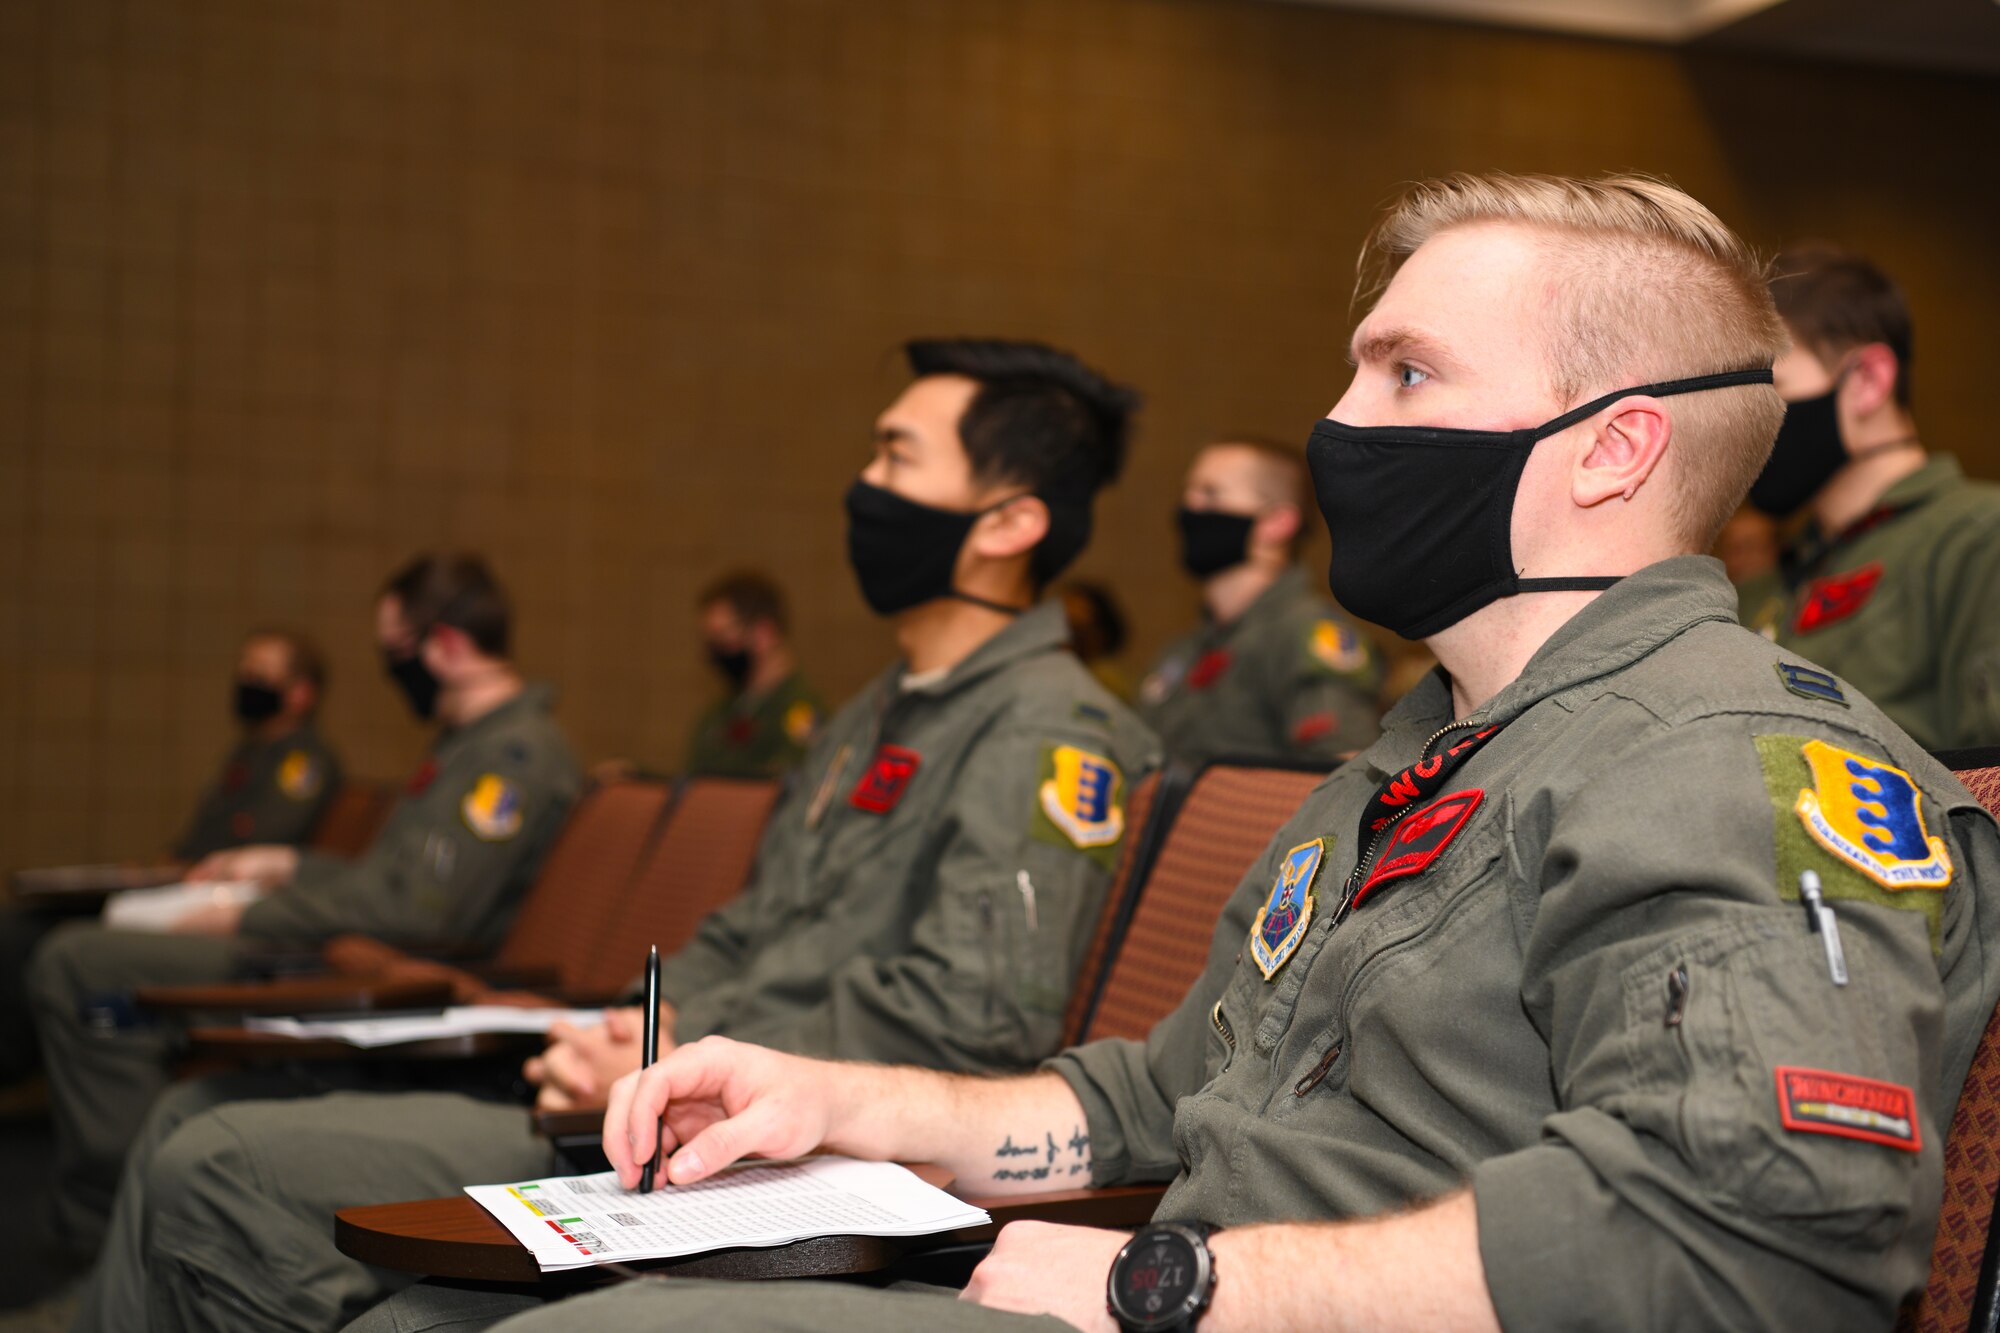 A 34th Bomb Squadron aviator attends a mission planning brief for a non-stop deployment from Ellsworth Air Force Base, S.D., to the U.S. European Command area of responsibility May 3, 2020. The U.S. maintains the capability, readiness, and will to defend interests globally, and will work closely with allies and partners to quickly and decisively respond to threats and malign activity. (U.S. Air Force photo by Senior Airman Nicolas Z. Erwin)